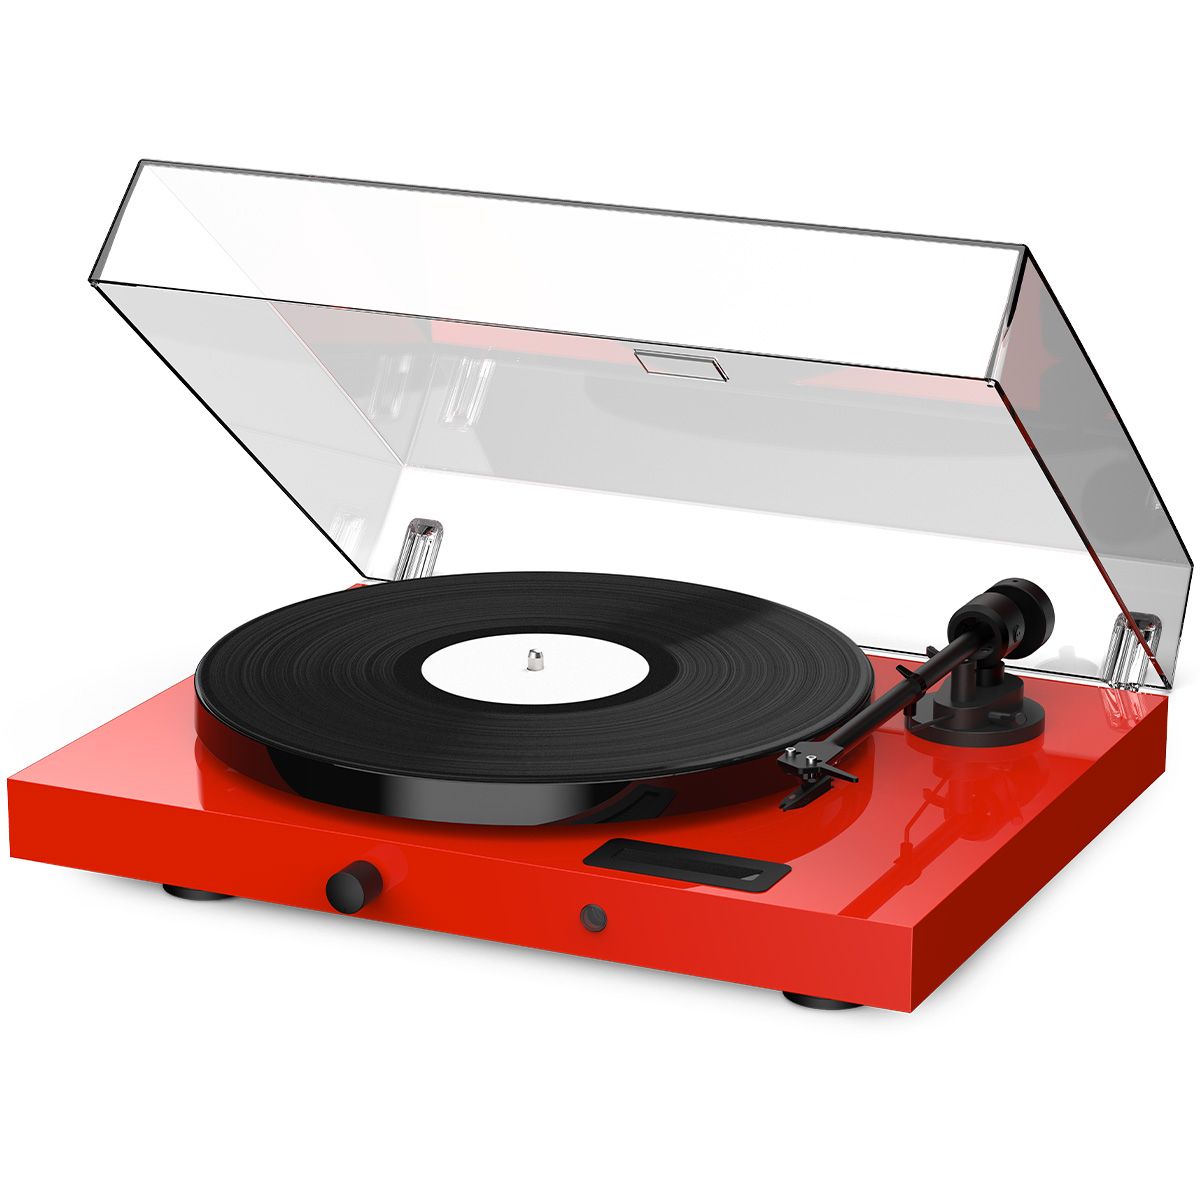 Pro-Ject Juke Box E1 Turntable in red w/ dustcover open